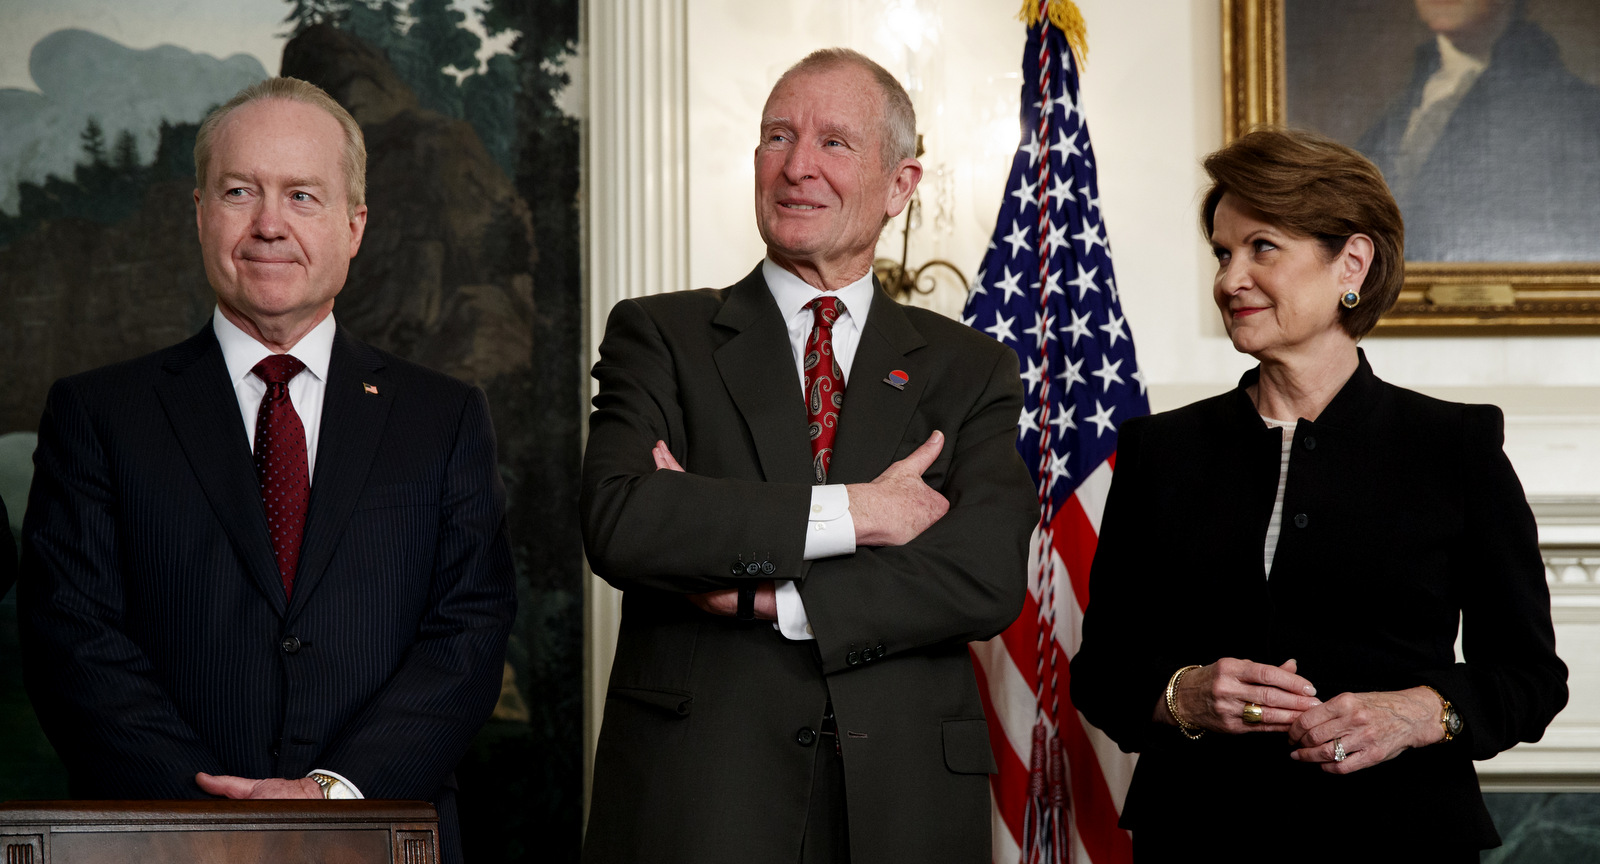 Raytheon CEO Tom Kennedy, left, former Director of National Intelligence Dennis Blair, center, and Lockheed Martin CEO Marillyn Hewson wait for the arrival of President Donald Trump in the Diplomatic Reception Room of the White House, March 22, 2018. (AP/Evan Vucci)